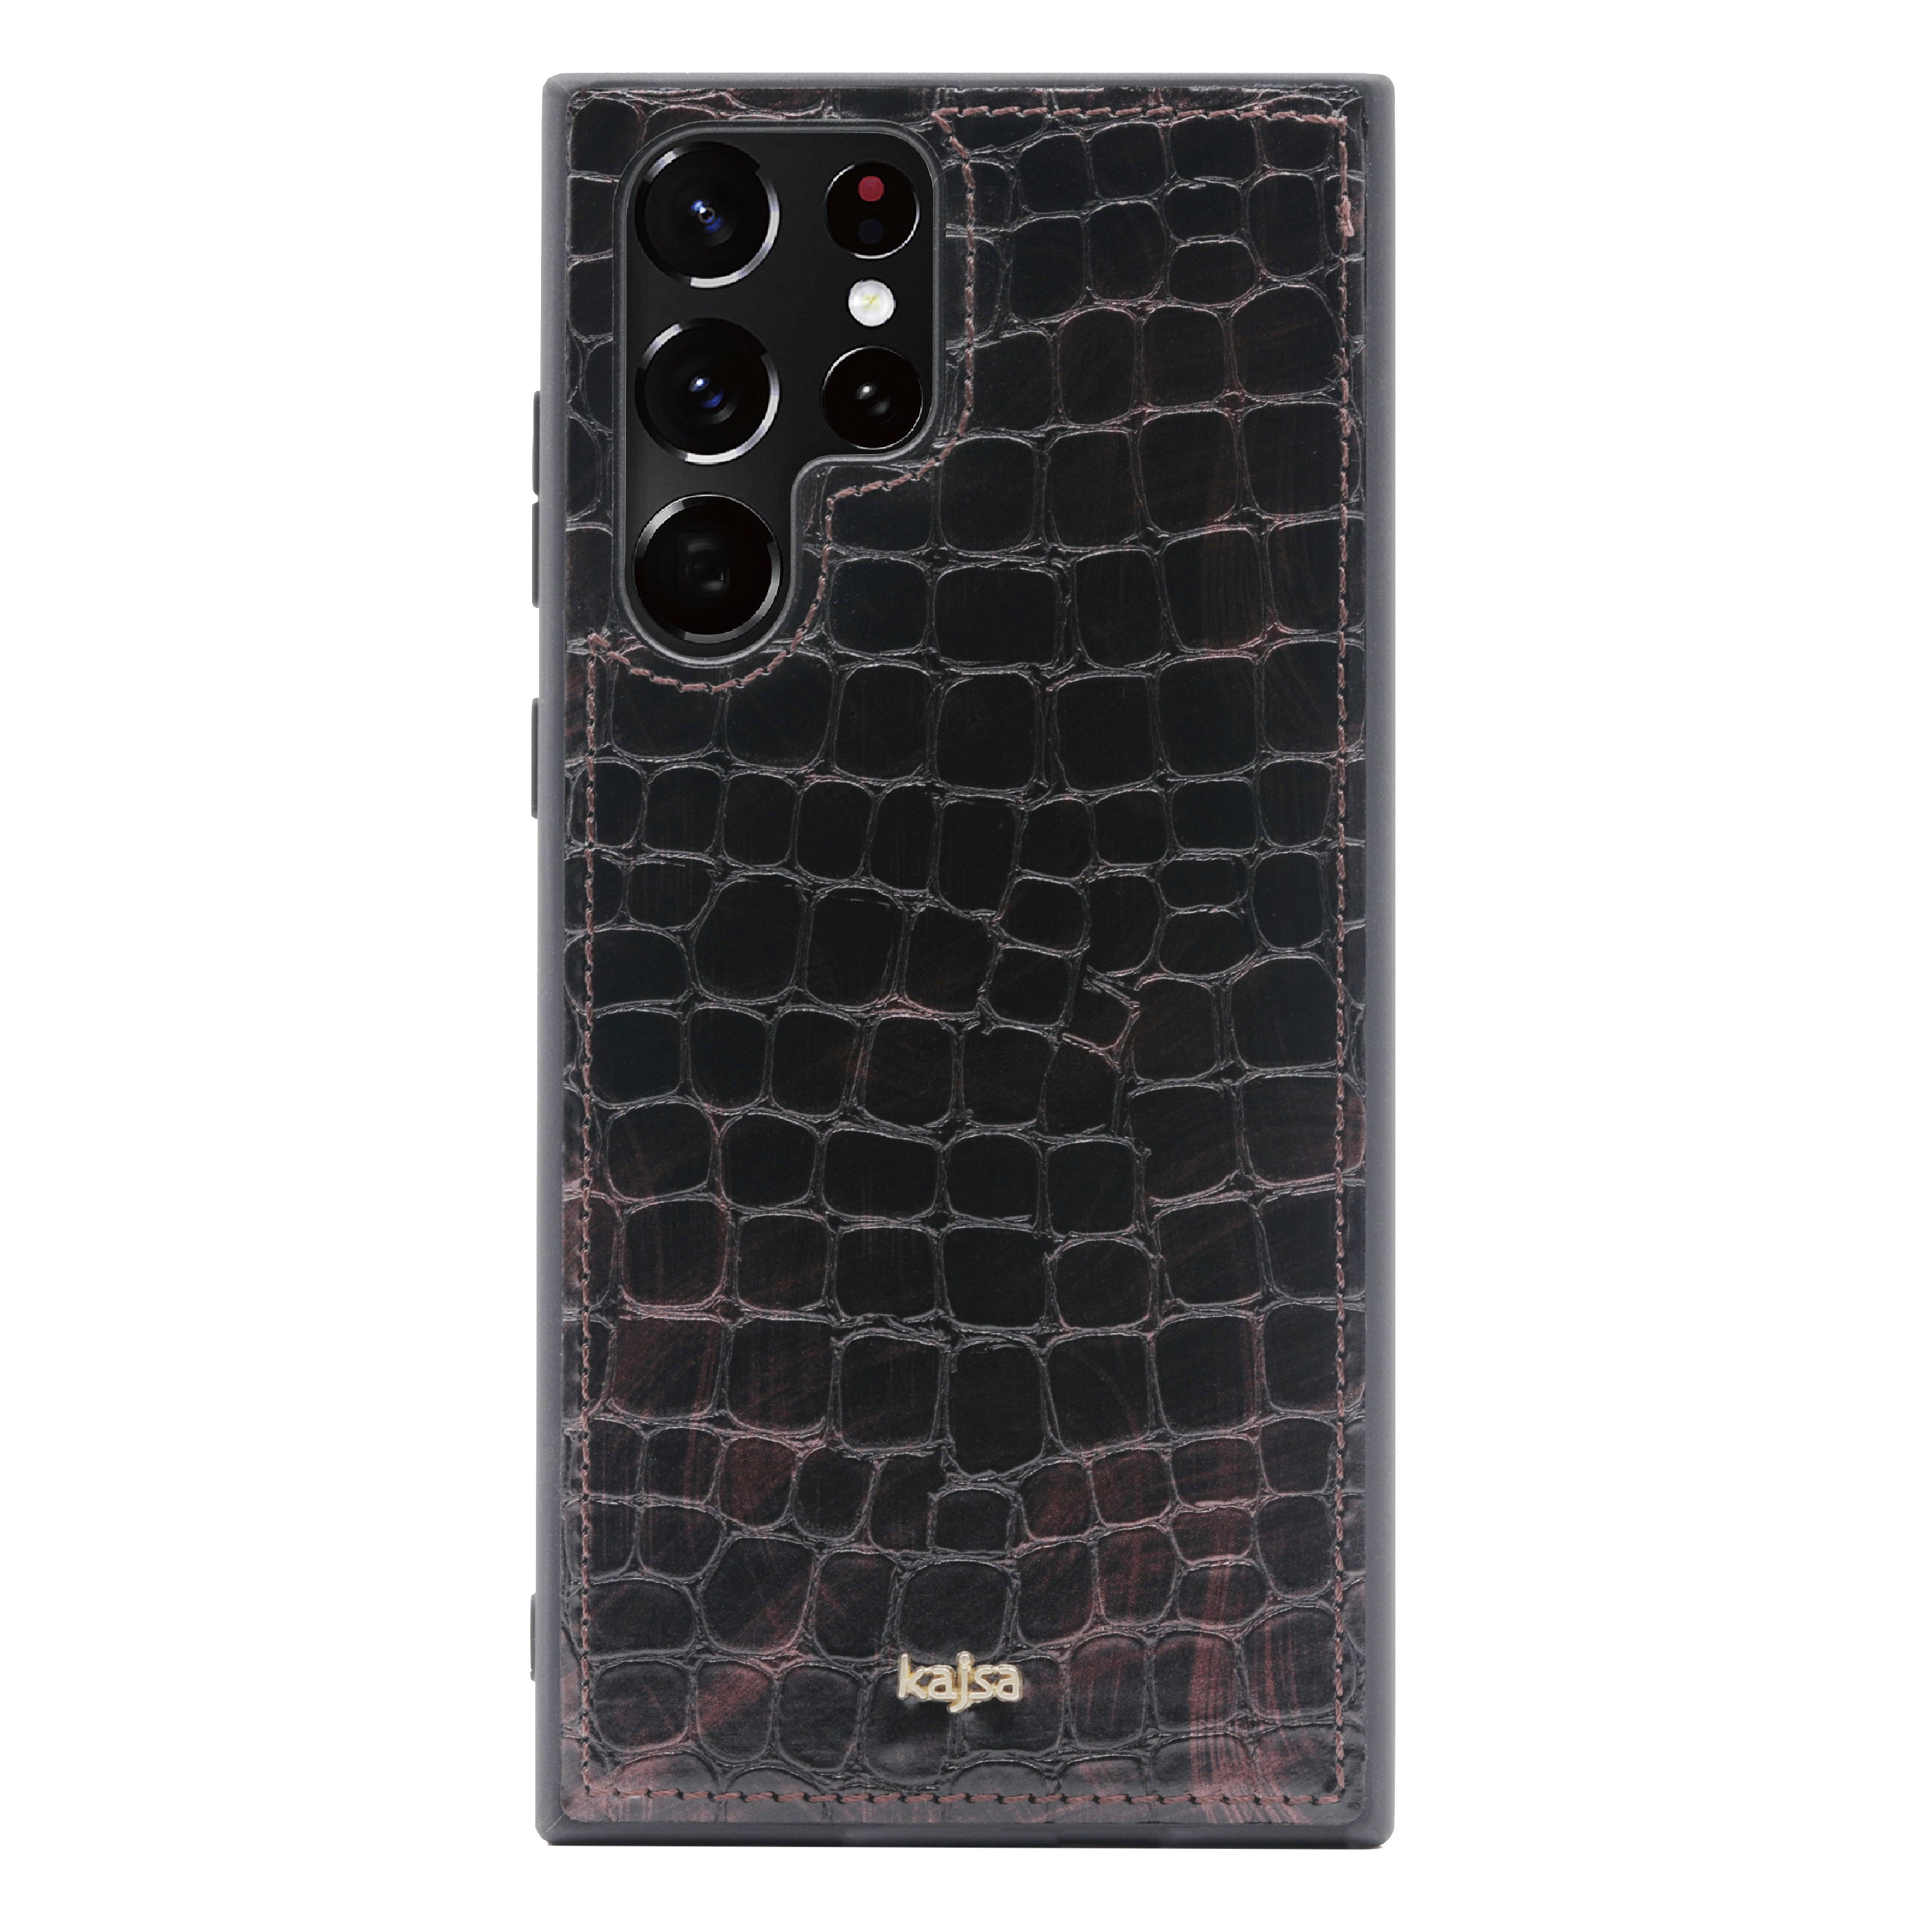 Glamorous Collection - Stone Pattern Back Case for Samsung Galaxy S22/S22+/S22 Ultra-Phone Case- phone case - phone cases- phone cover- iphone cover- iphone case- iphone cases- leather case- leather cases- DIYCASE - custom case - leather cover - hand strap case - croco pattern case - snake pattern case - carbon fiber phone case - phone case brand - unique phone case - high quality - phone case brand - protective case - buy phone case hong kong - online buy phone case - iphone‎手機殼 - 客製化手機殼 - samsung ‎手機殼 - 香